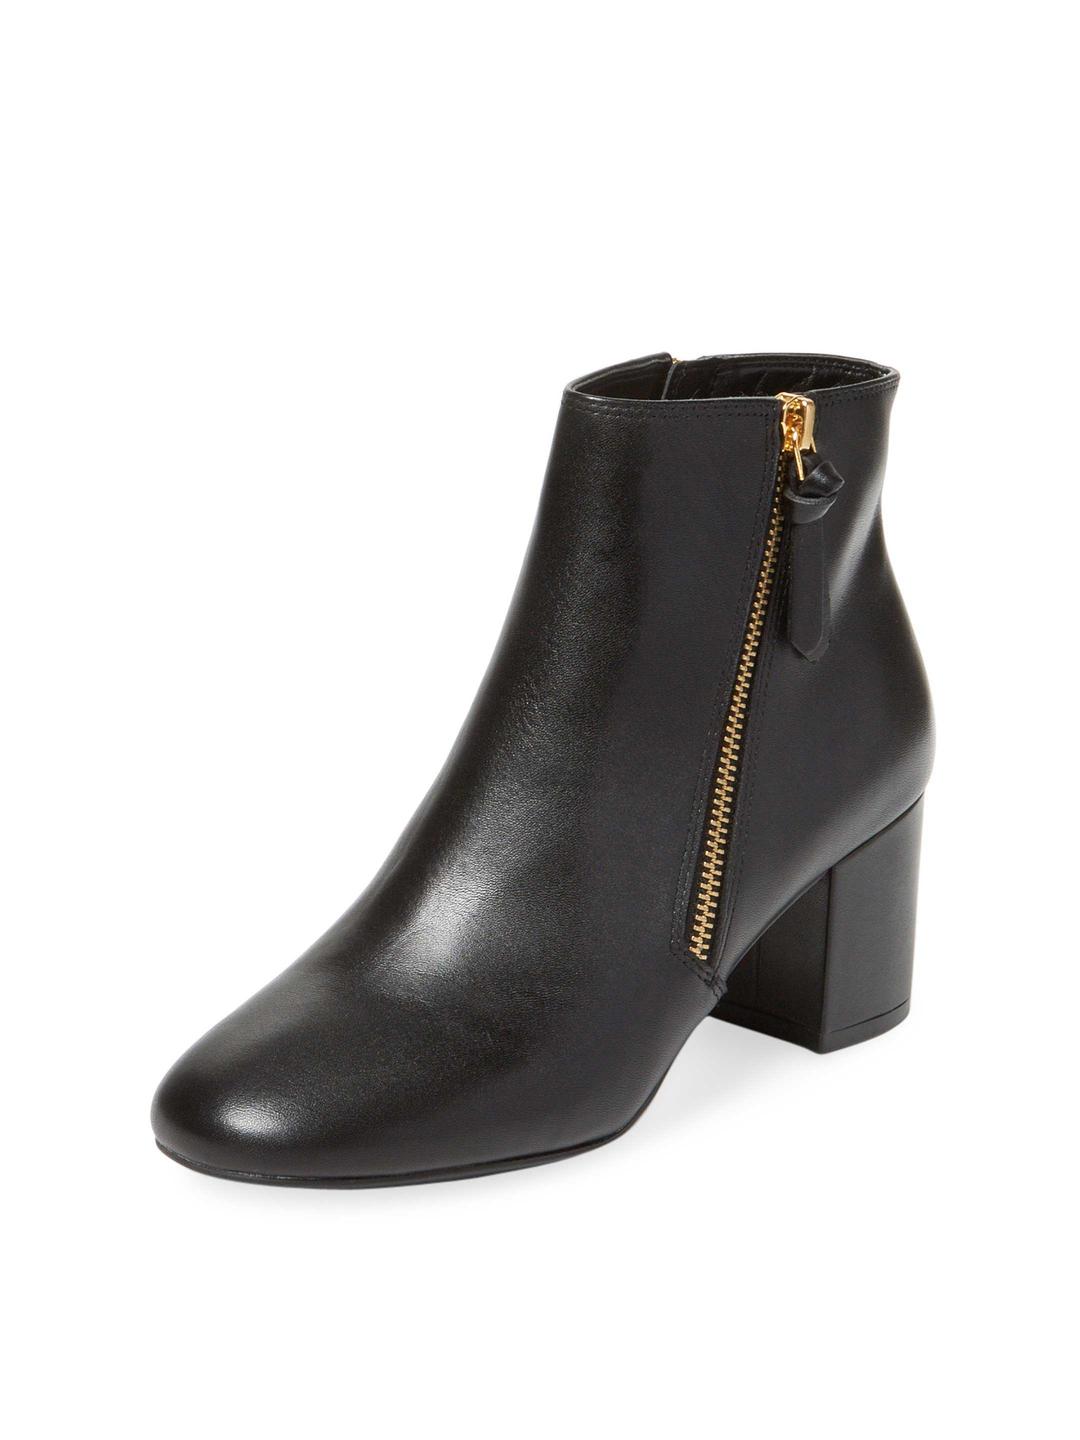 Cole Haan Leather Saylor Grand Bootie in Black Leather (Black) - Lyst